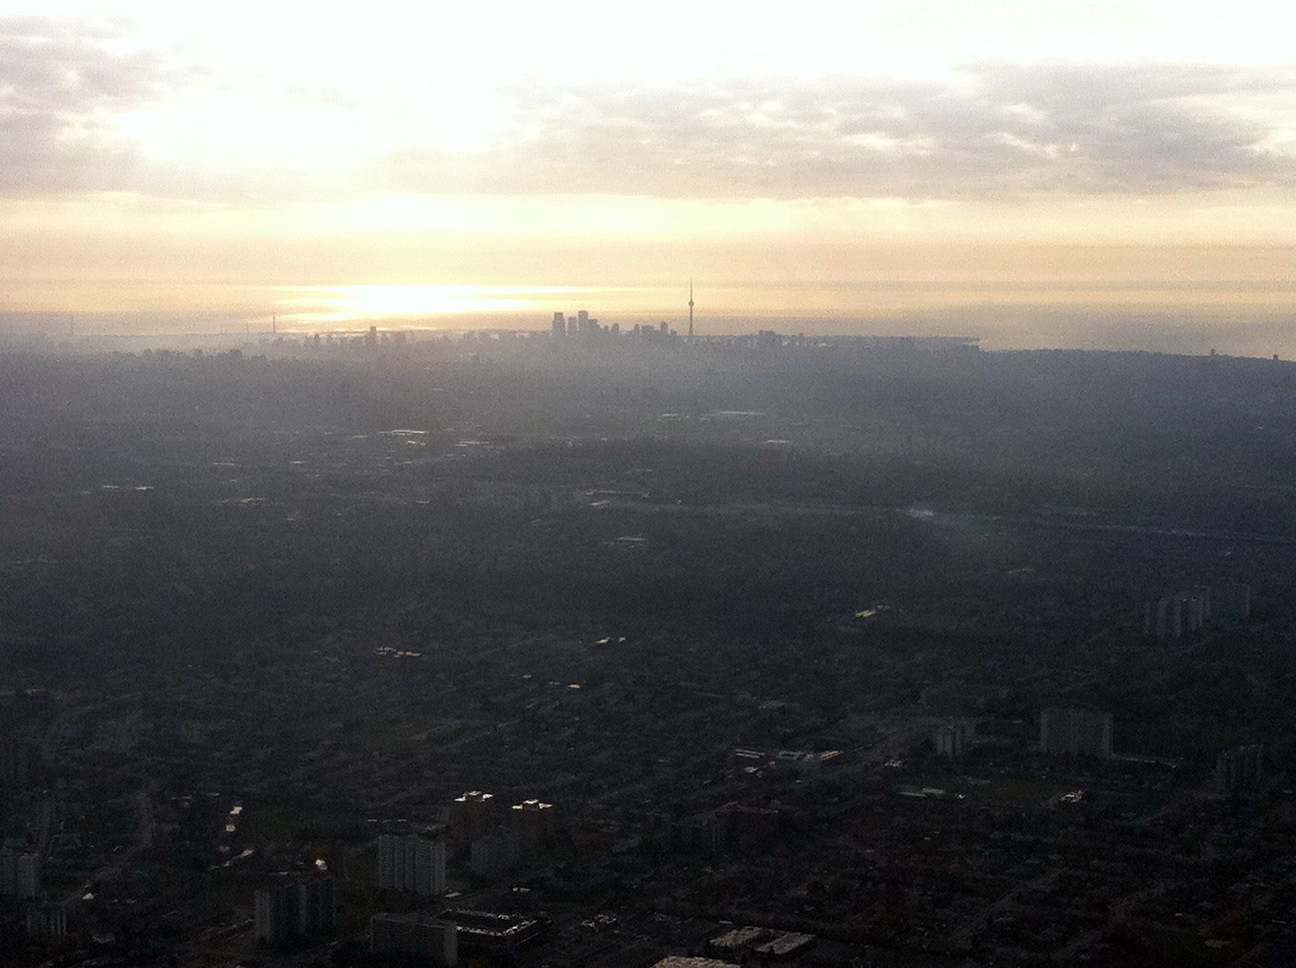 View of Downtown Toronto Skyline by Plane